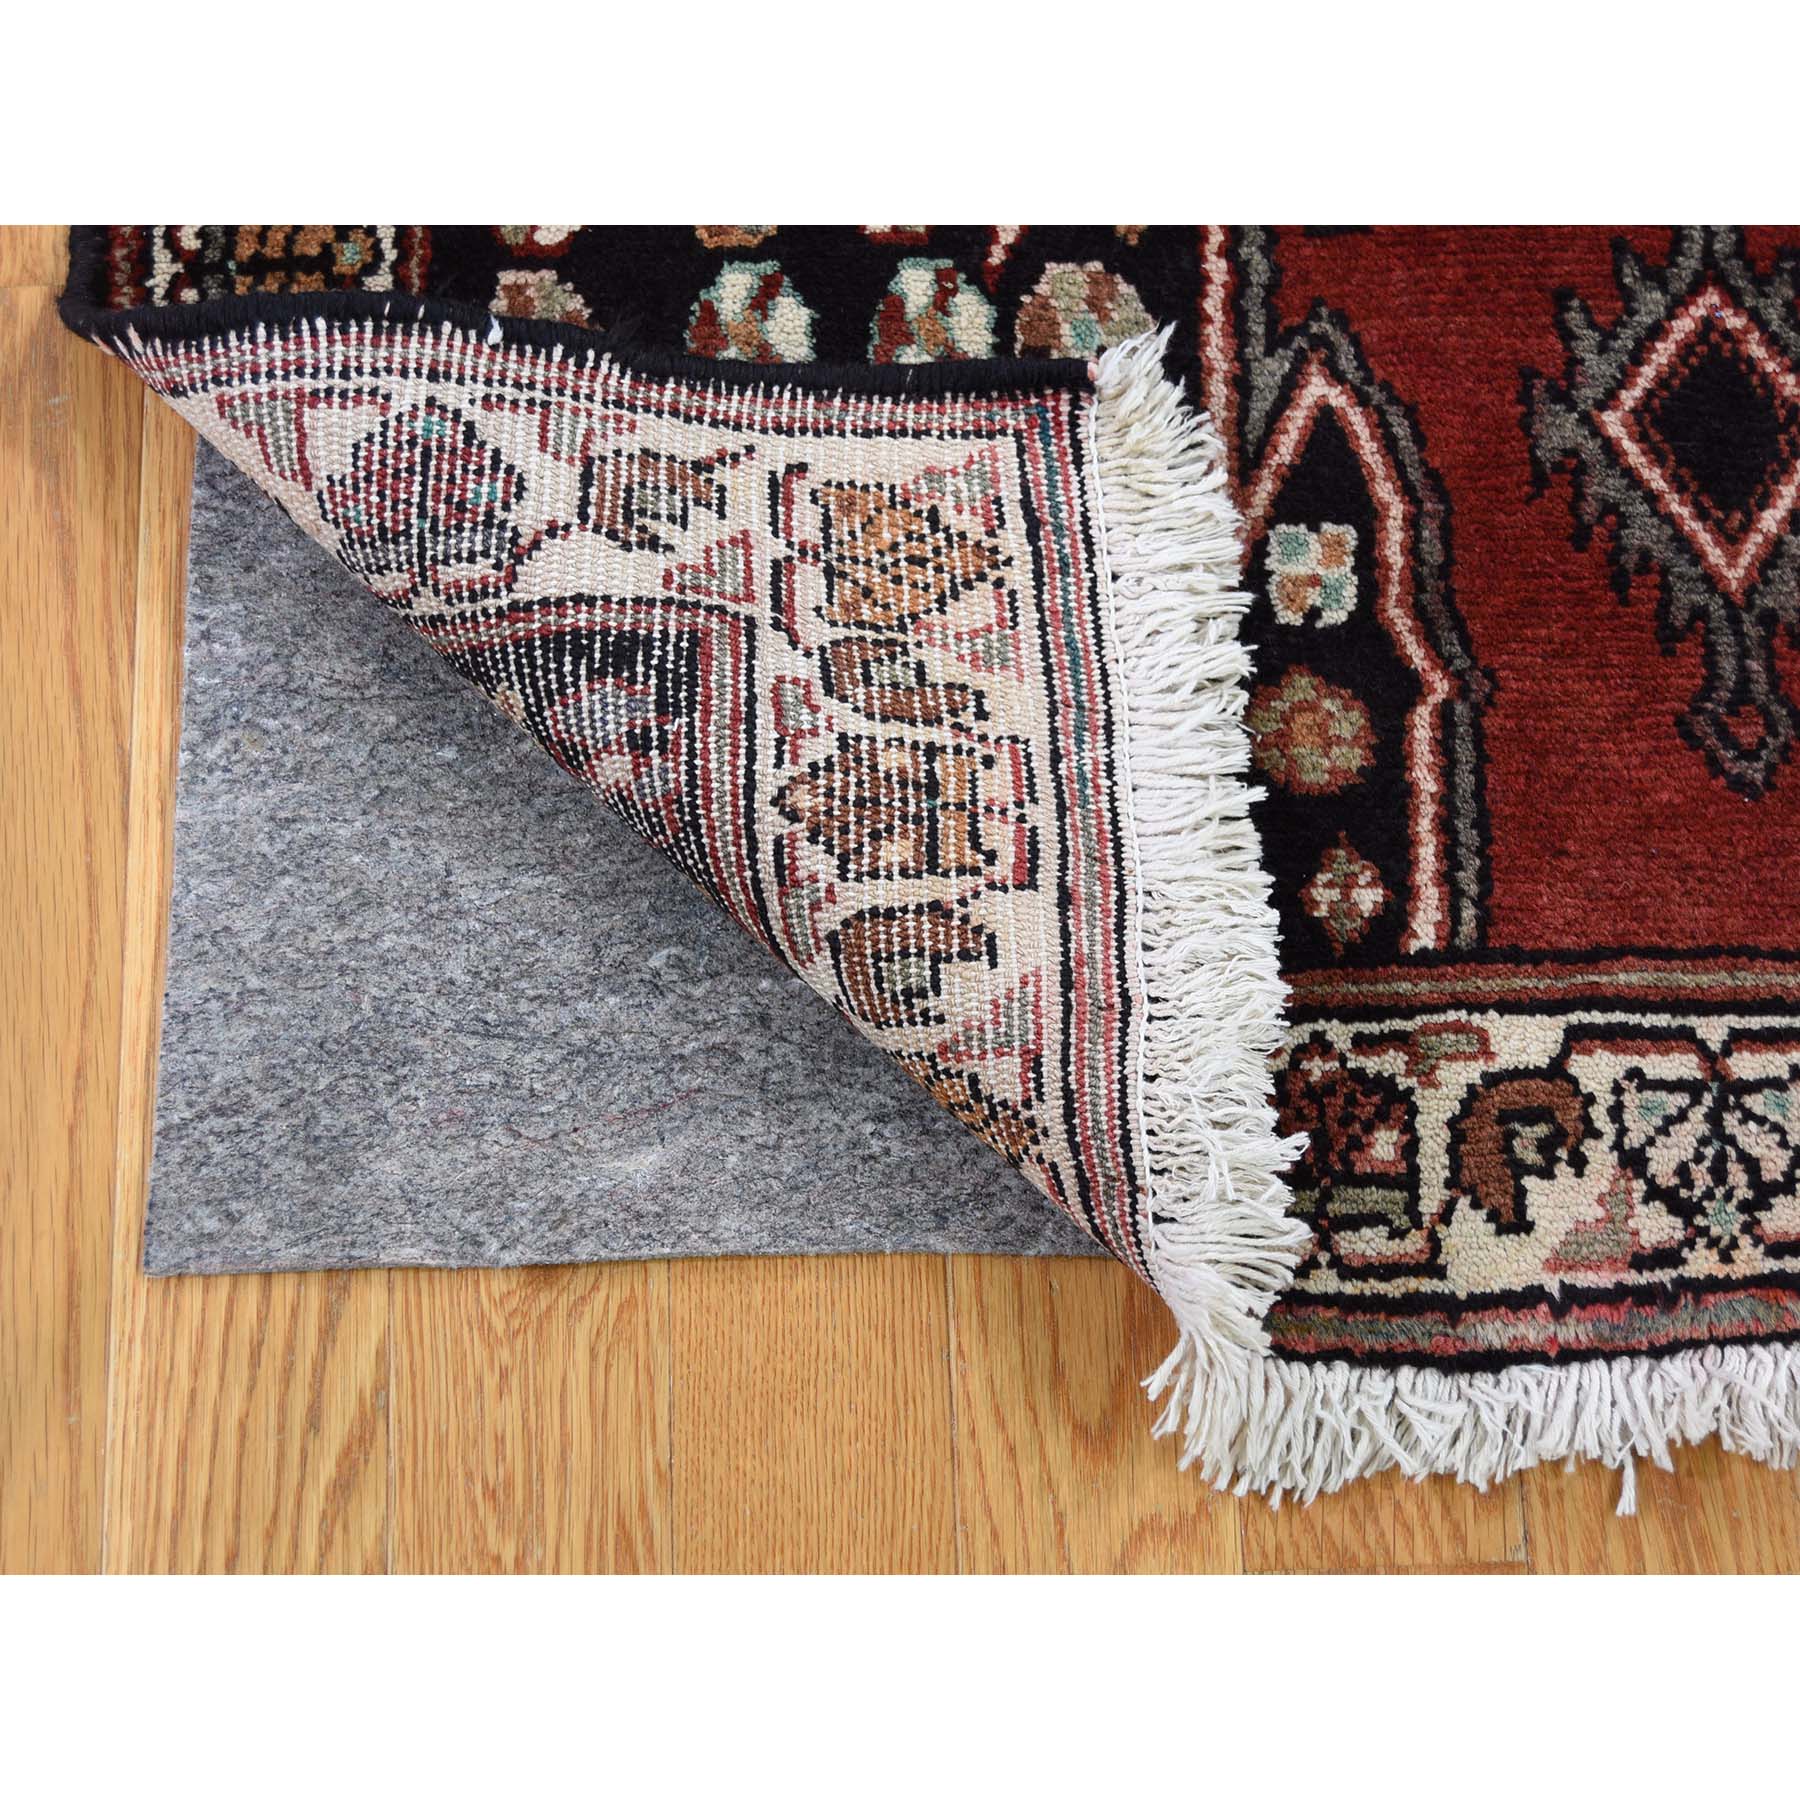 3-6 x4-8  New Persian Mazlagan Hand-Knotted Oriental Pure Wool Rug 